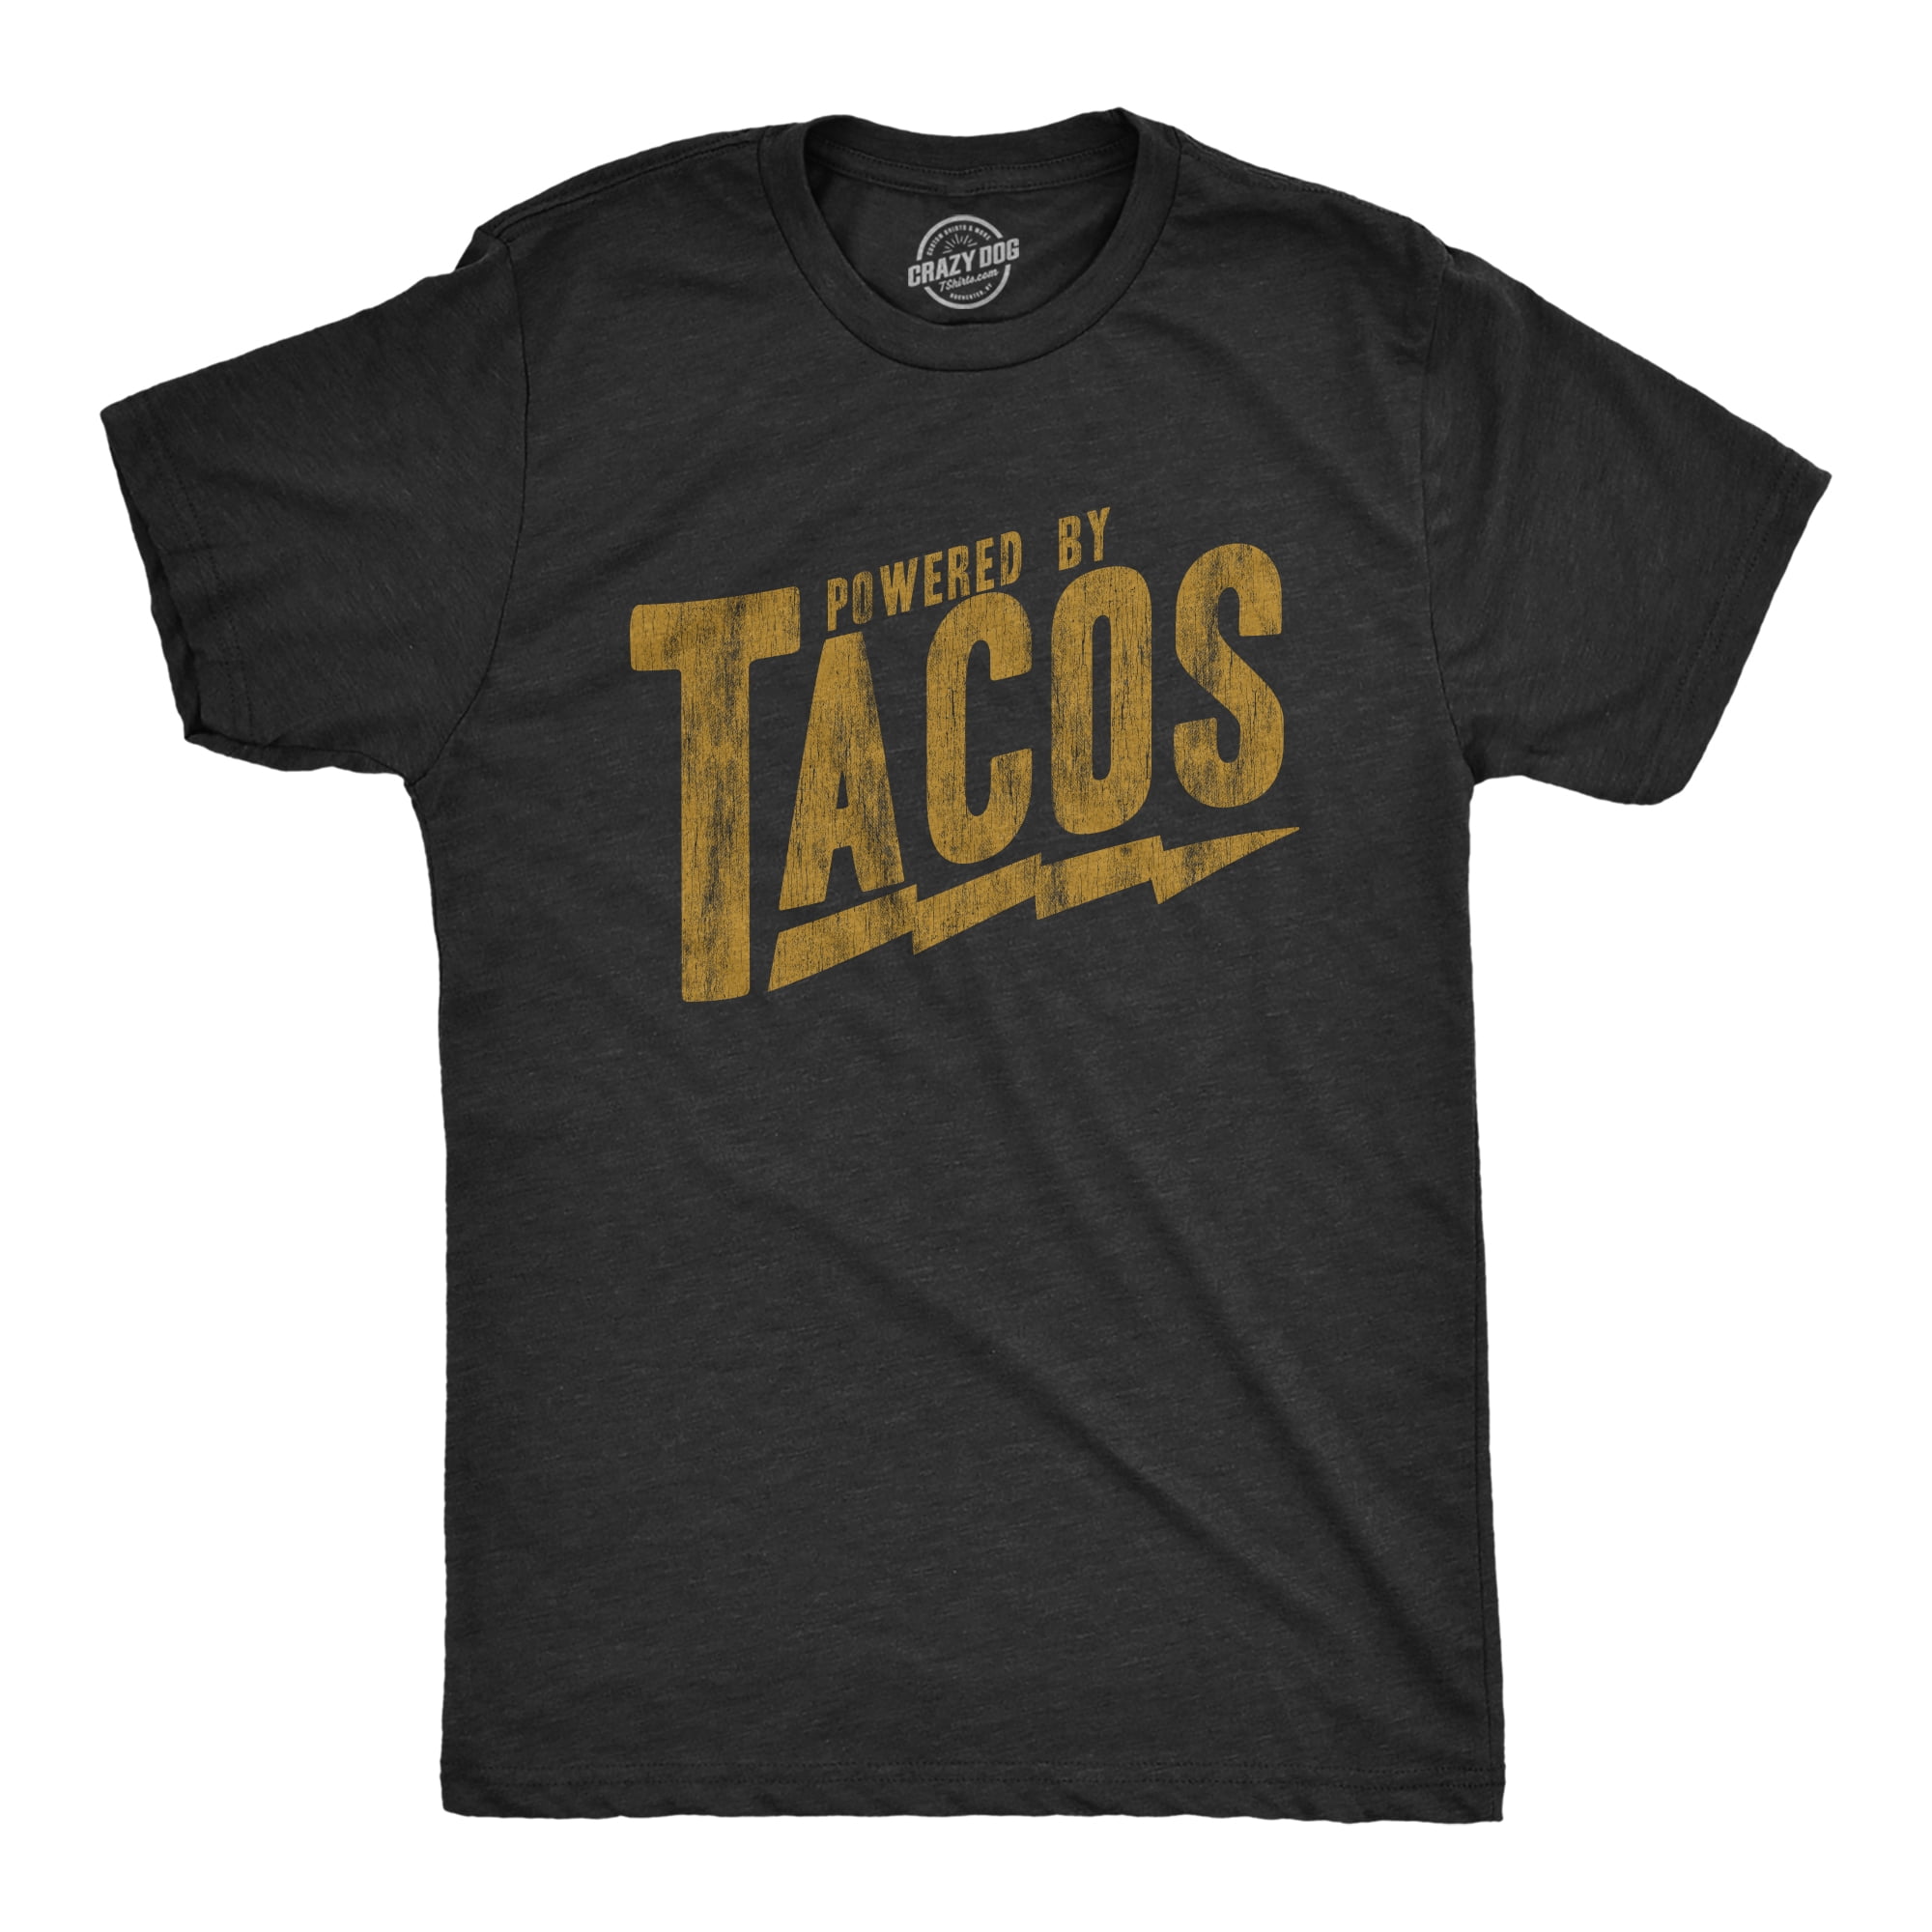 Mens Powered By Tacos T Shirt Funny Sarcastic Vintage Retro Graphic Tee ...